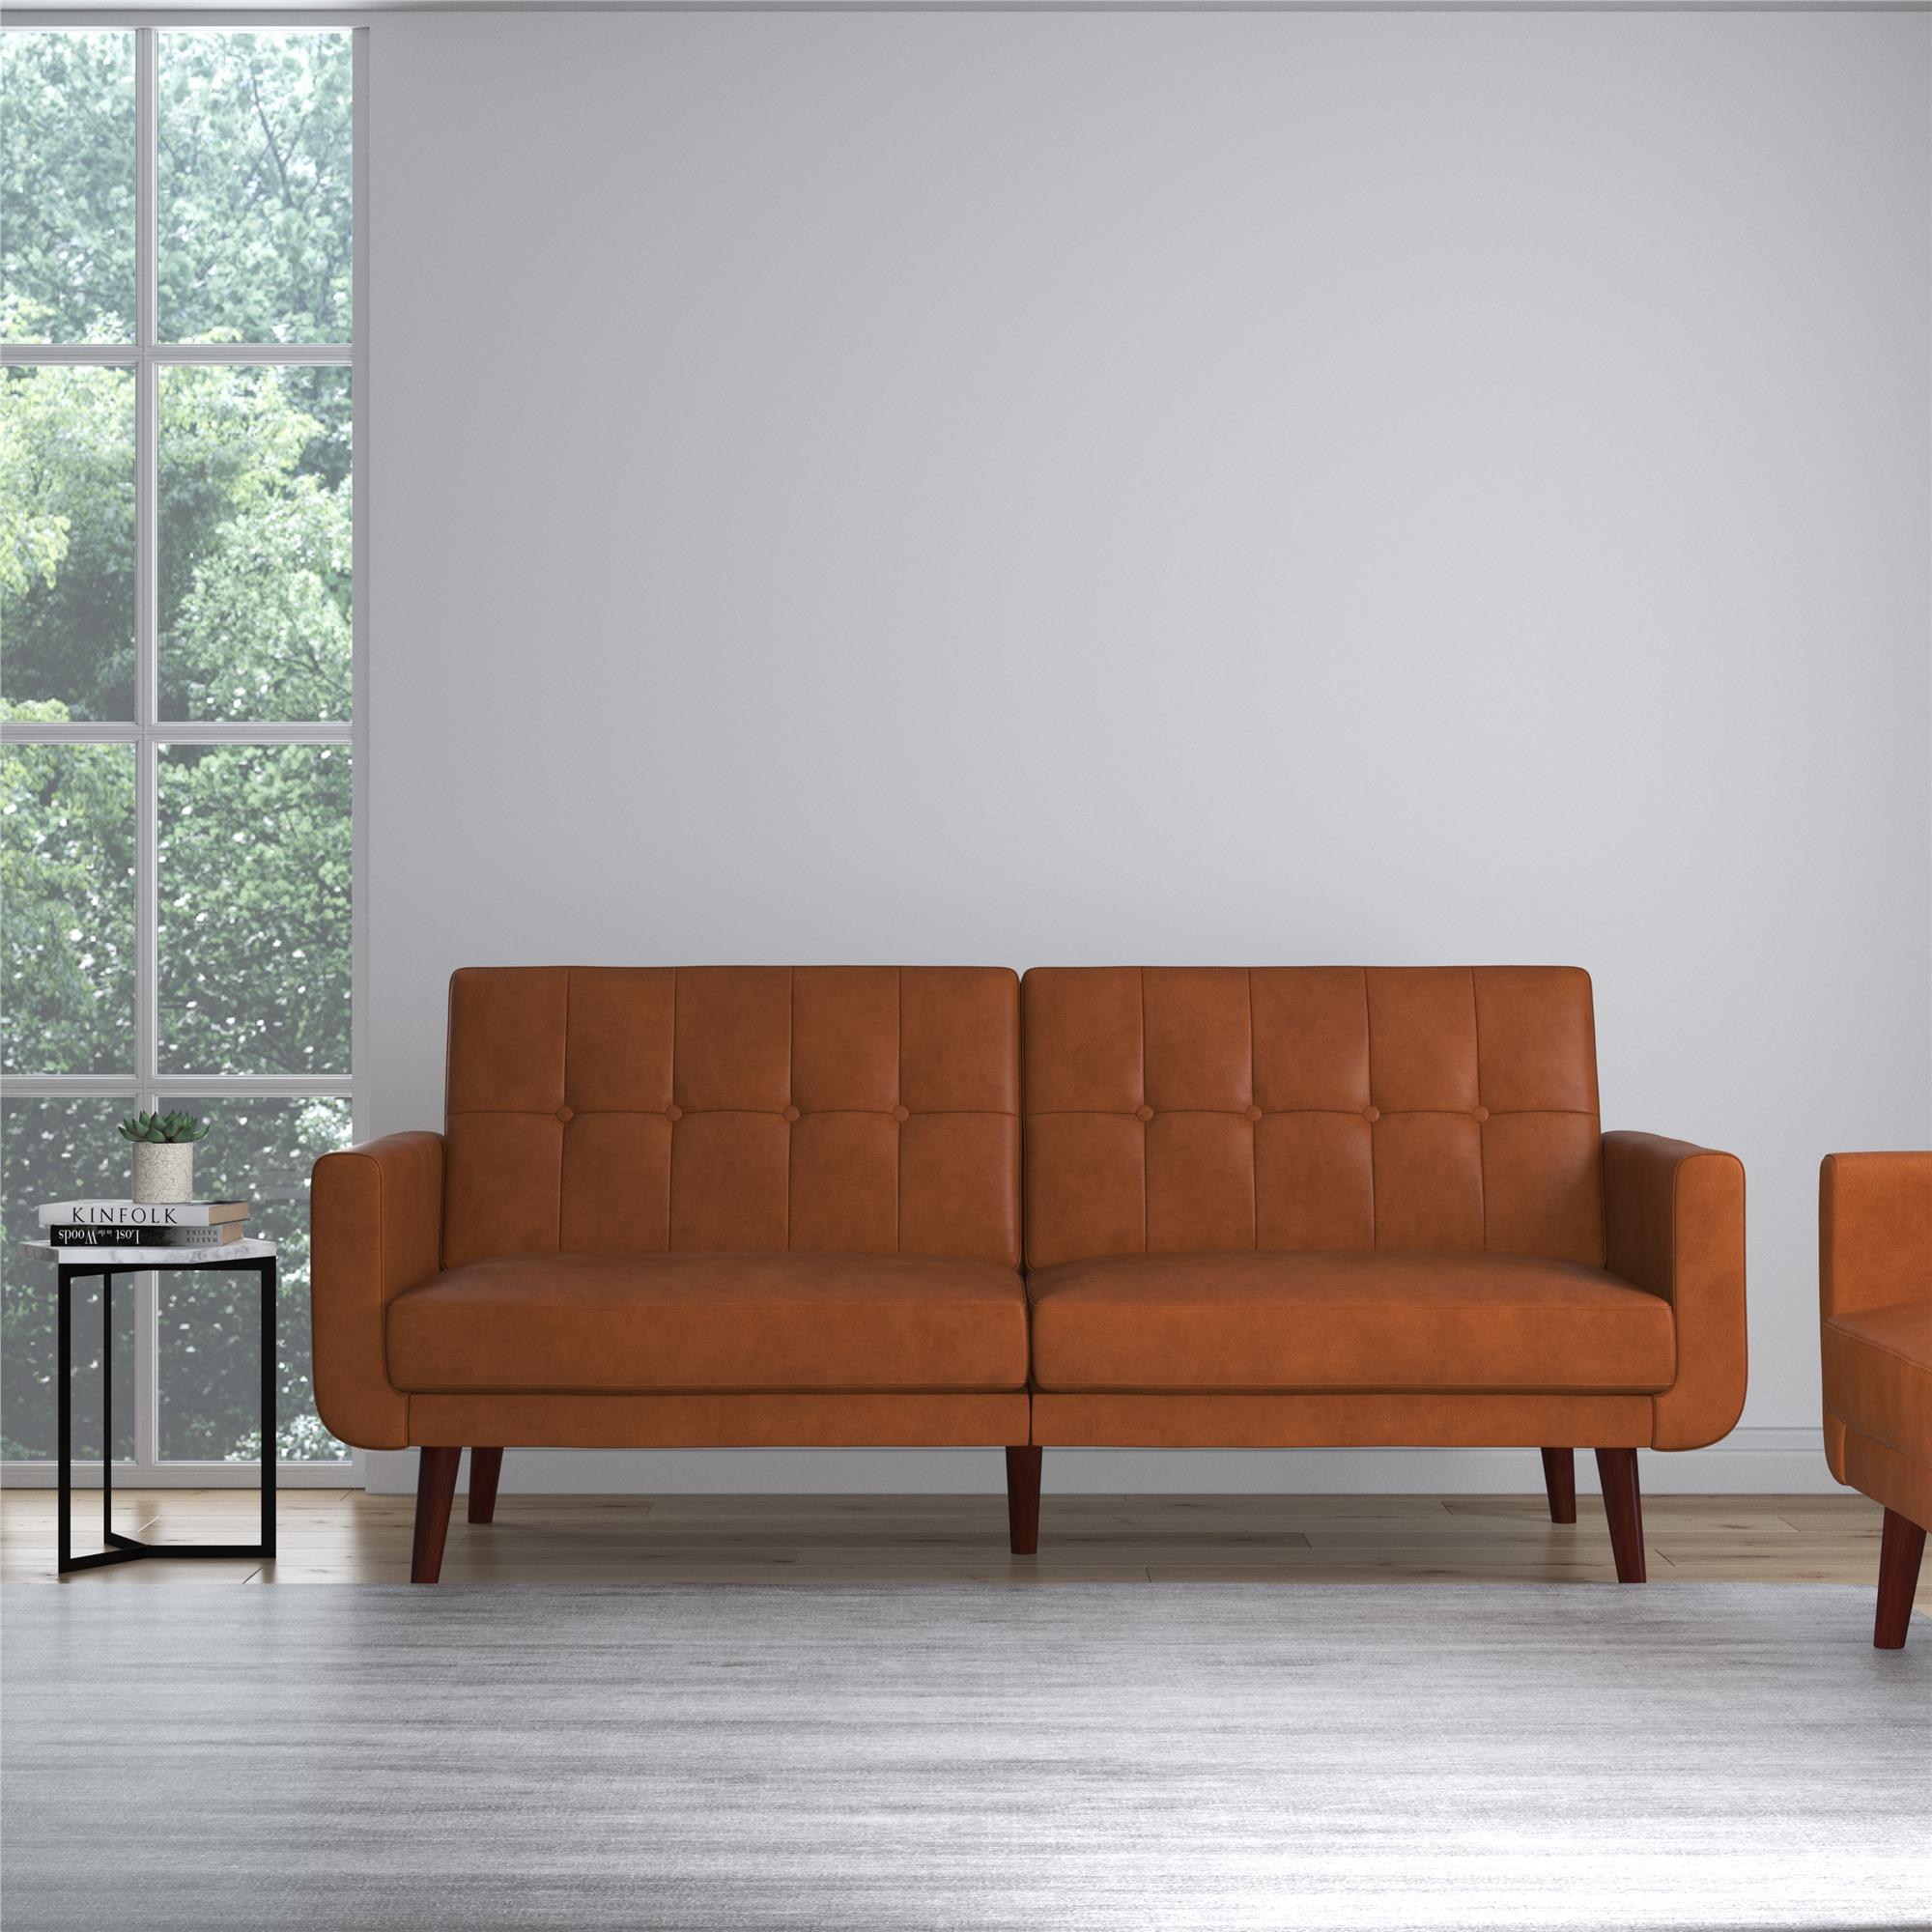 Better Homes & Gardens Nola Modern Futon, Camel Faux Leather - image 3 of 17